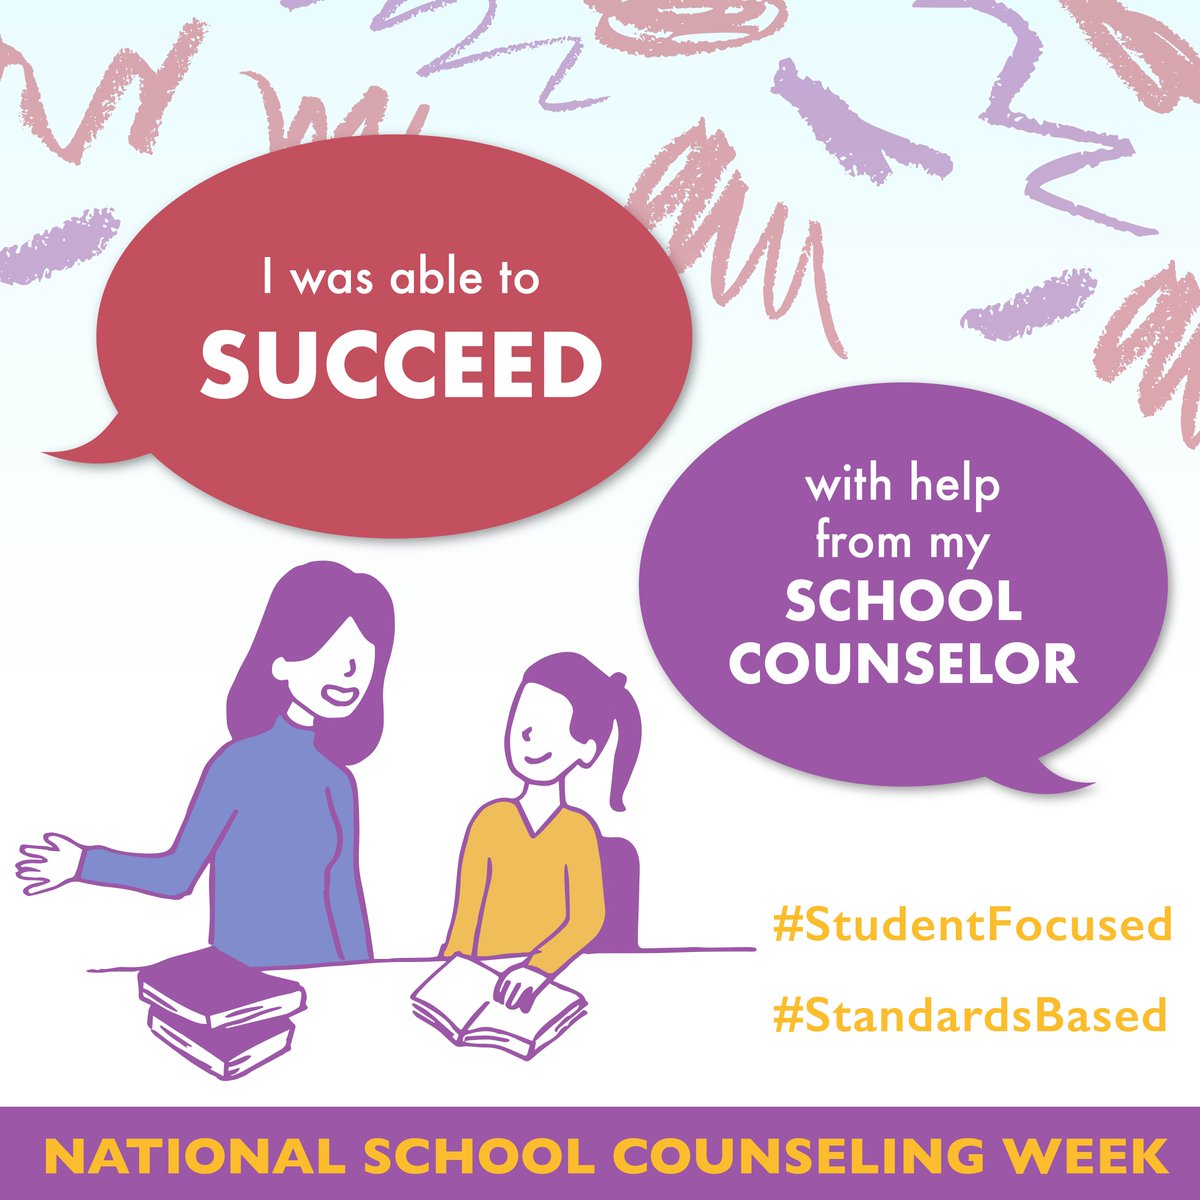 National School Counseling Week Feb. 5-9 highlights the tremendous impact that #schoolcounselors have on helping all students succeed. #Thankyou to the 120,000 #schoolcounselors across the nation for helping students reach their full potential! #NSCW24